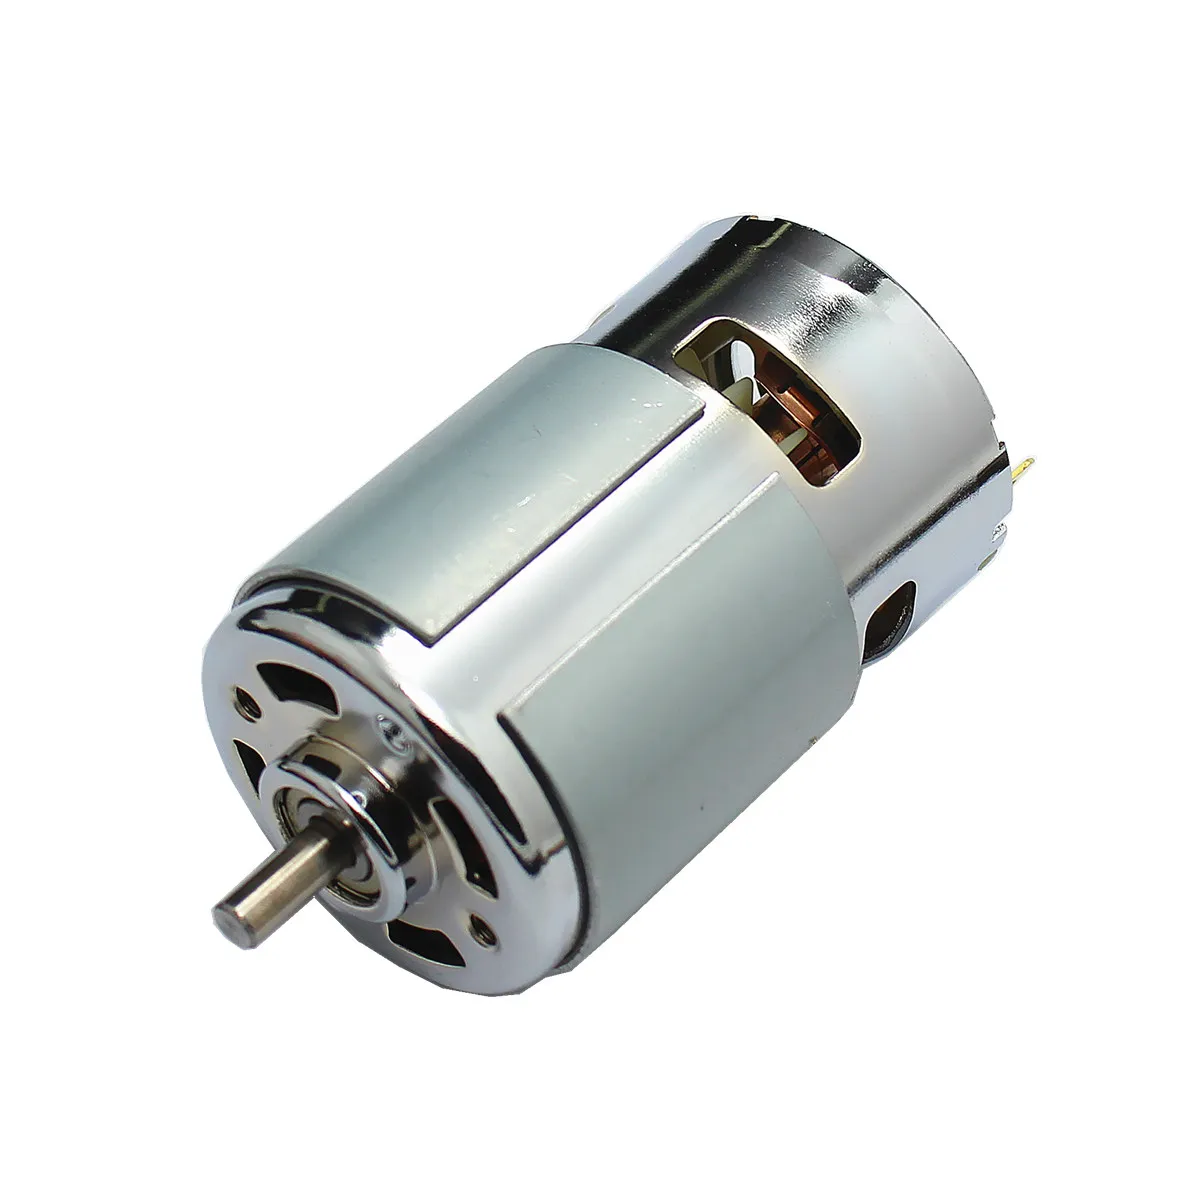 Specialize 14.4v 20200 Rpm Small Battery Powered Motor Buy Small